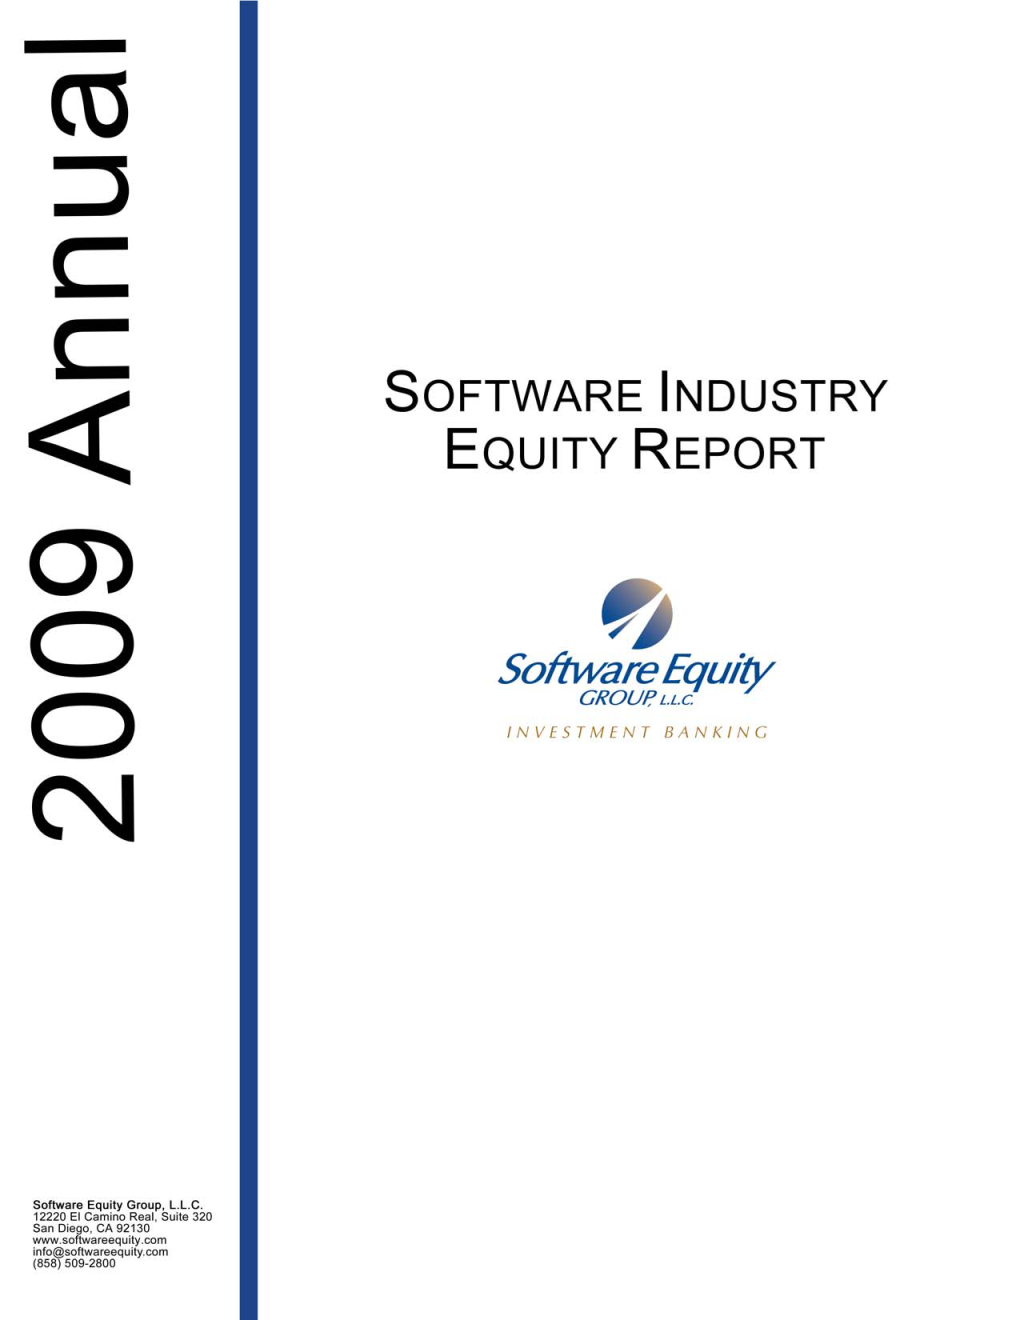 Software Equity Group's 2010 M&A Survey